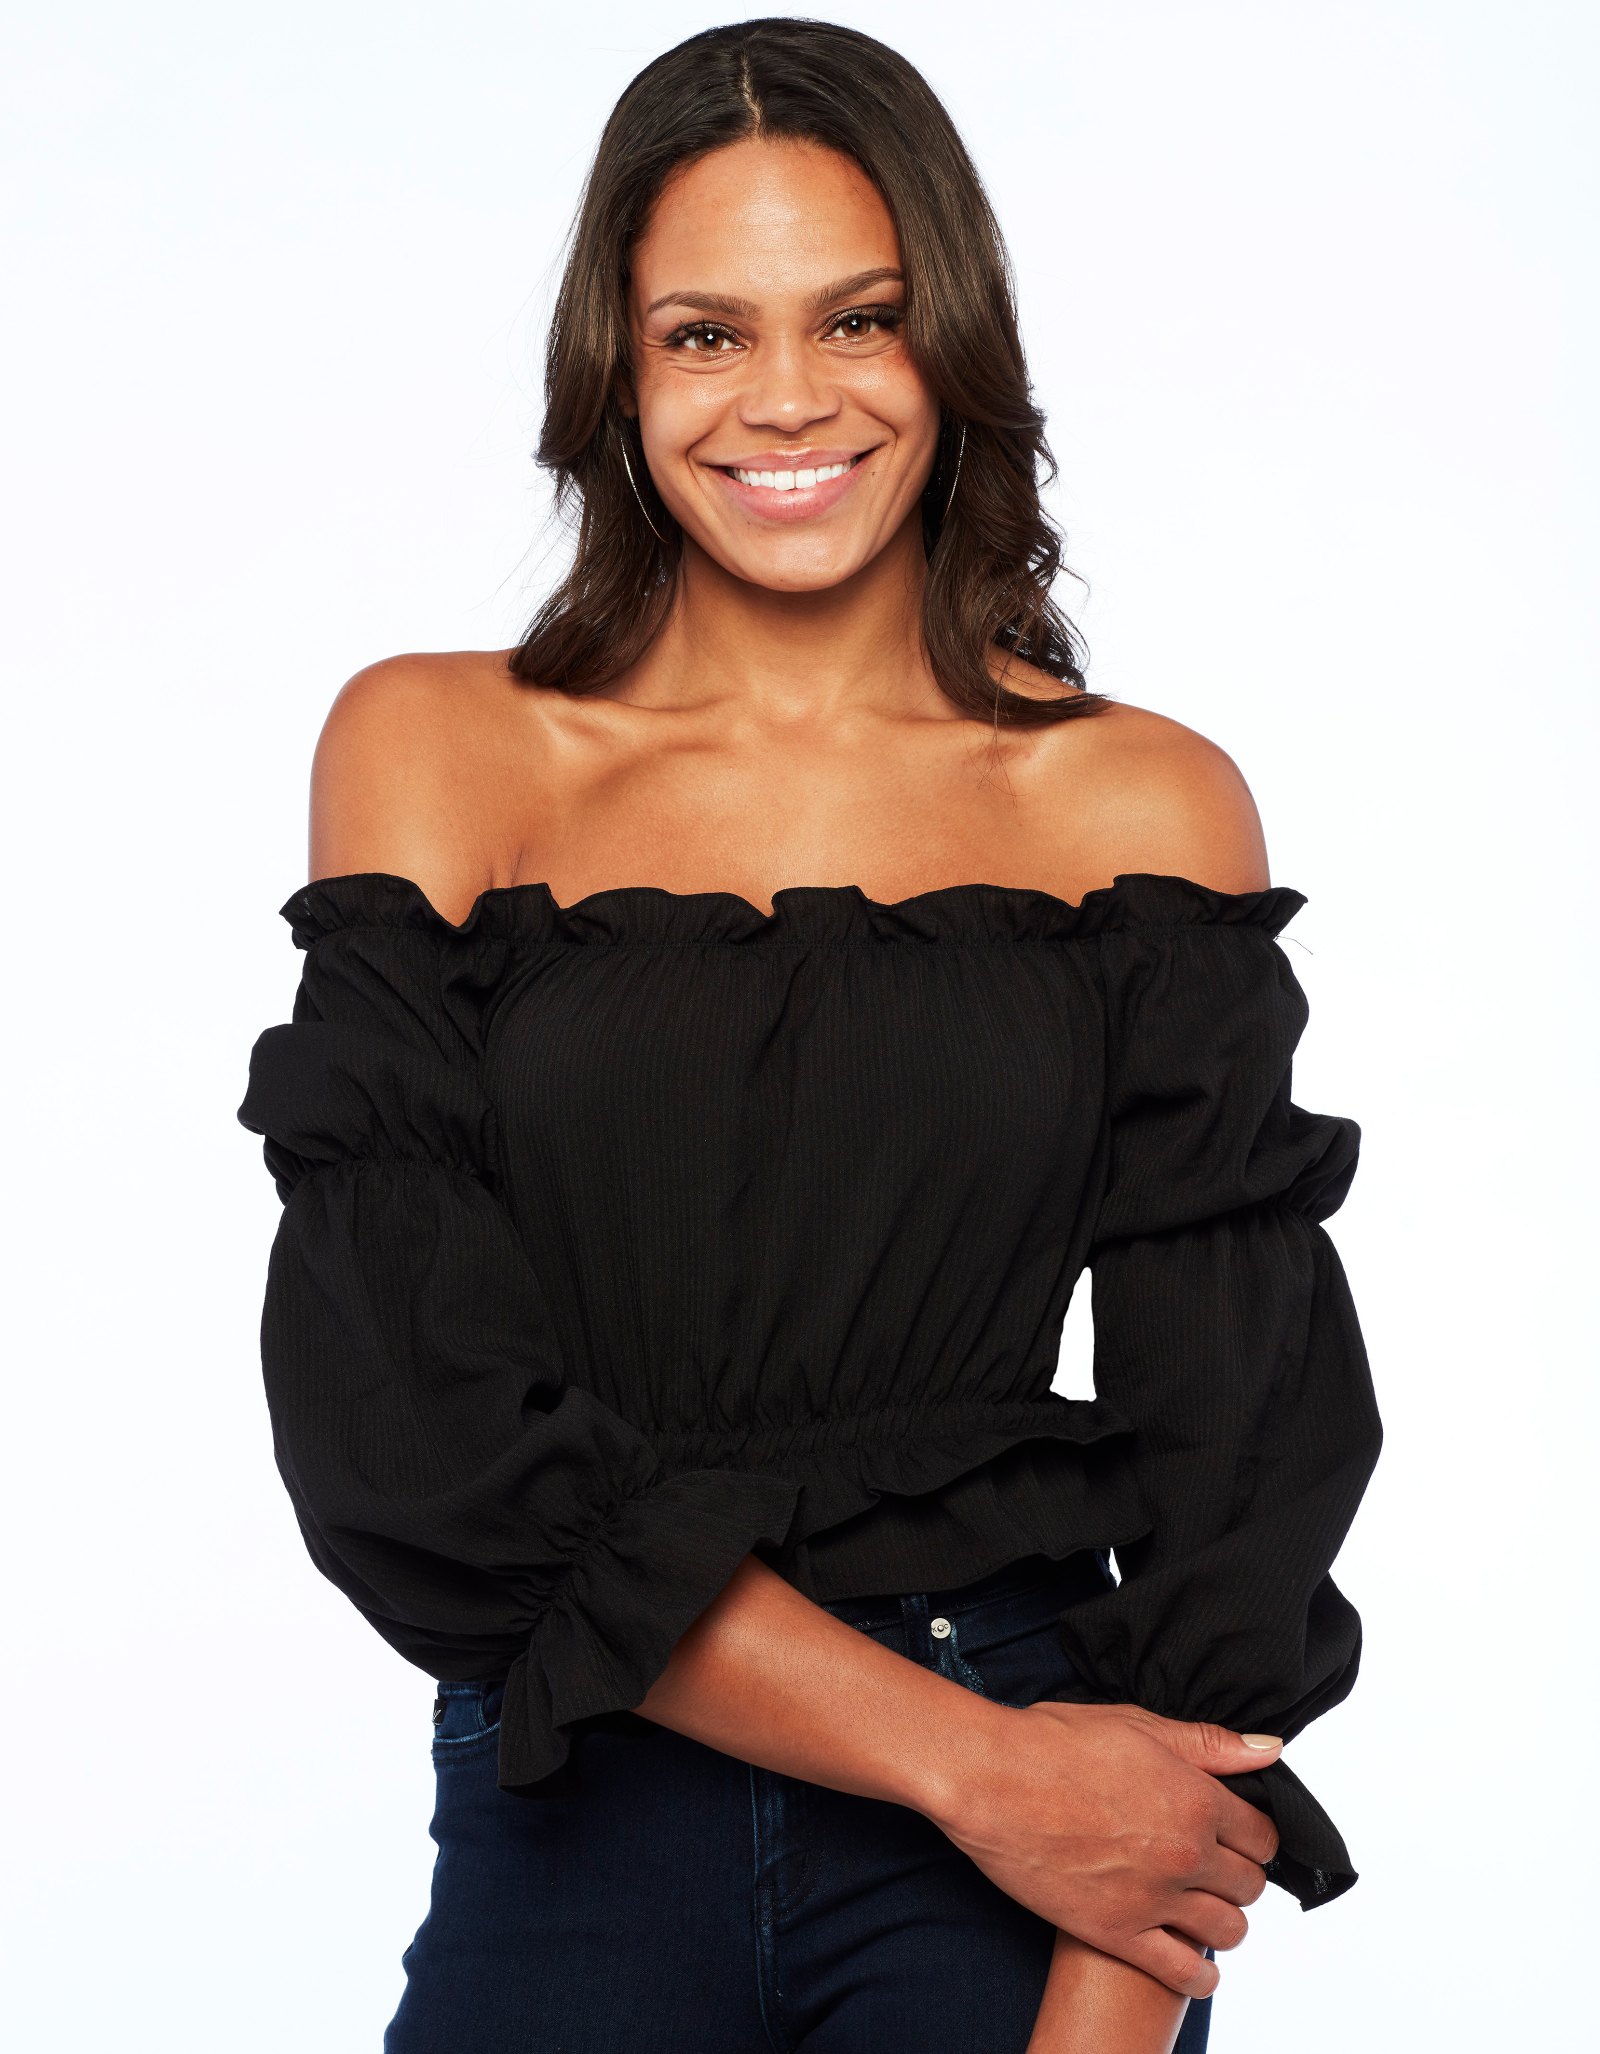 Michelle Young Named Season 18 Bachelorette After Katie Thurston | Us ...